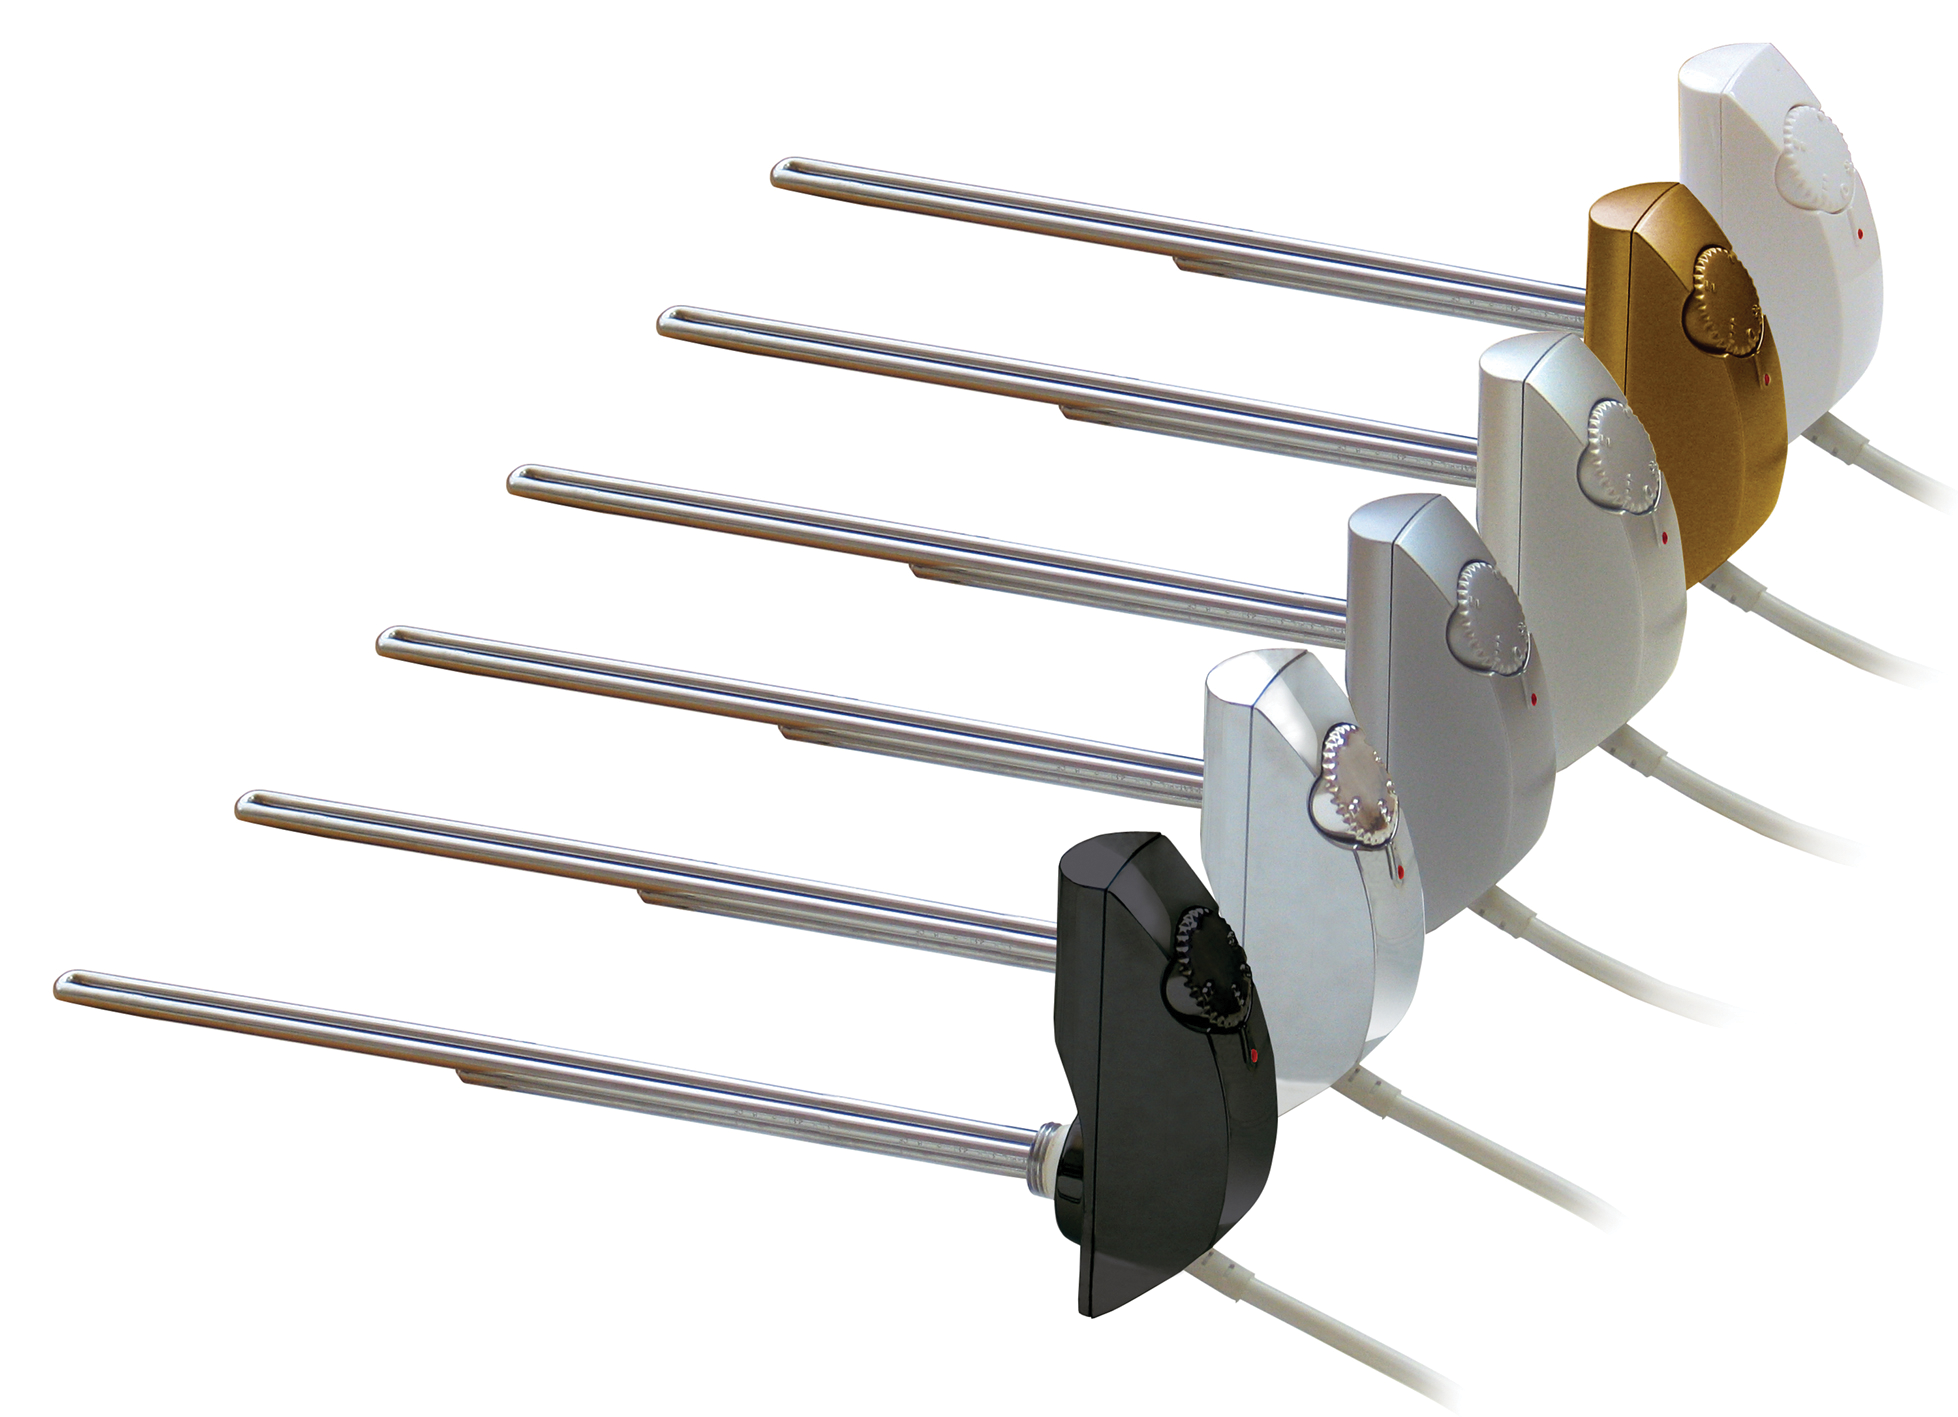 Electric elements for use in sectional aluminium, cast iron and column radiators